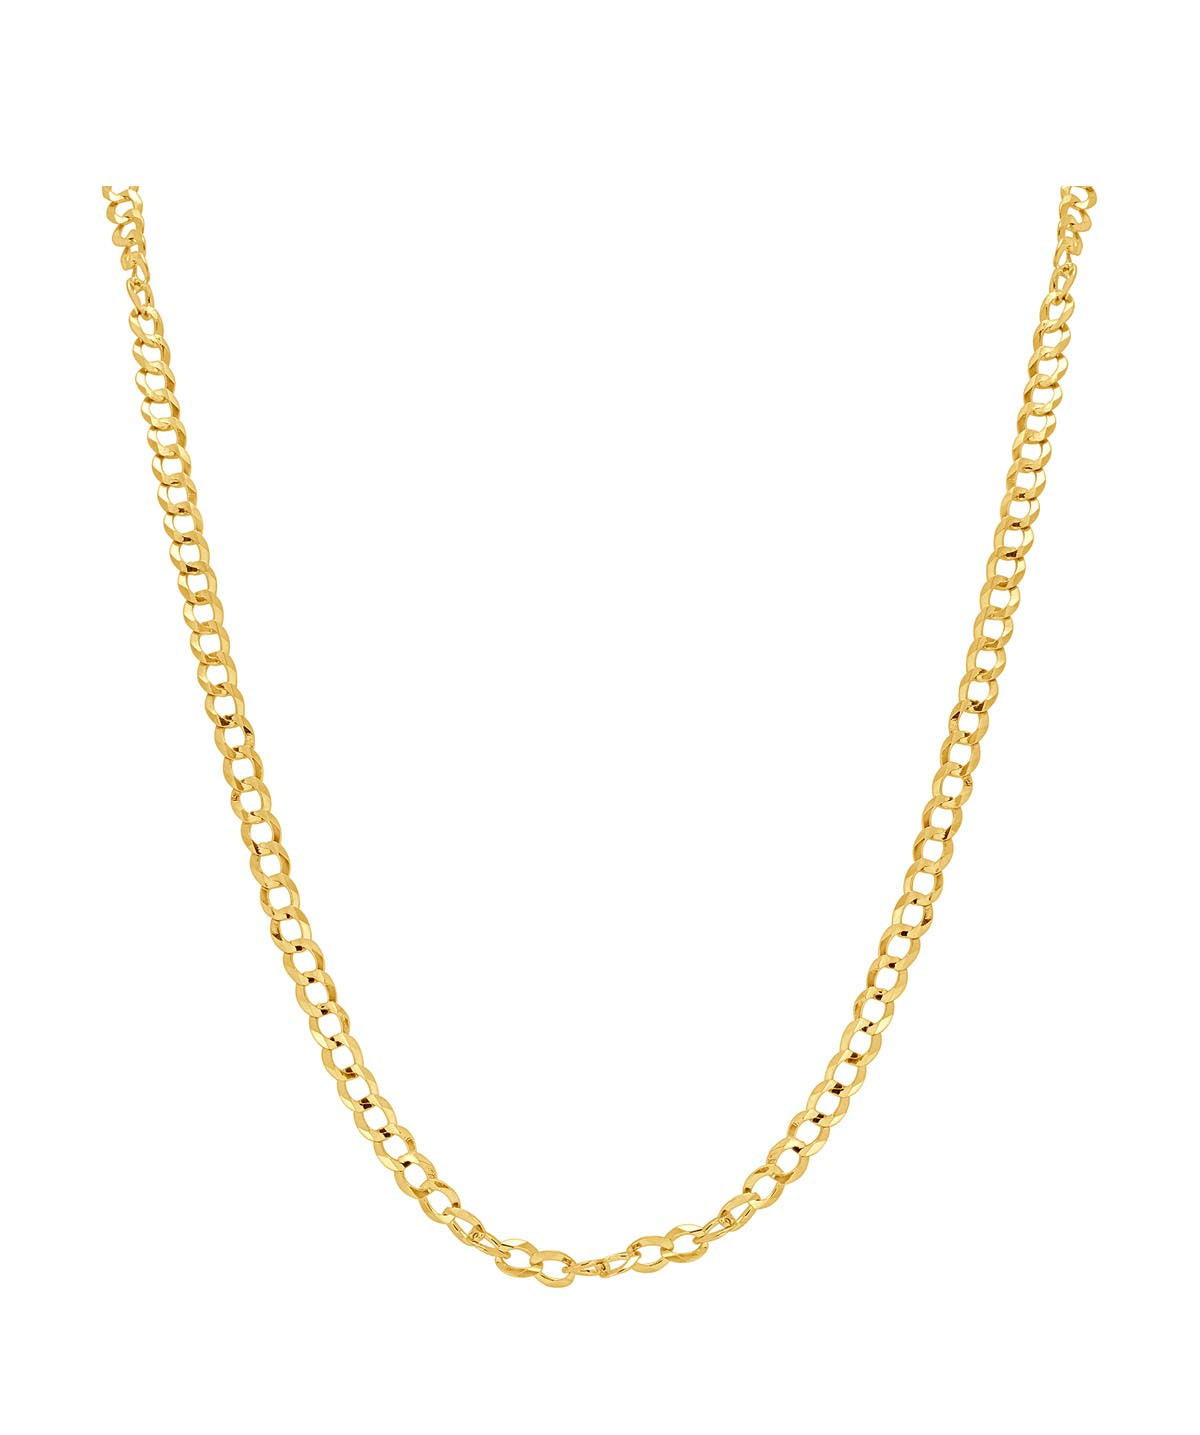 14K Yellow Gold 3.25mm Solid Cuban Link Chain 24"